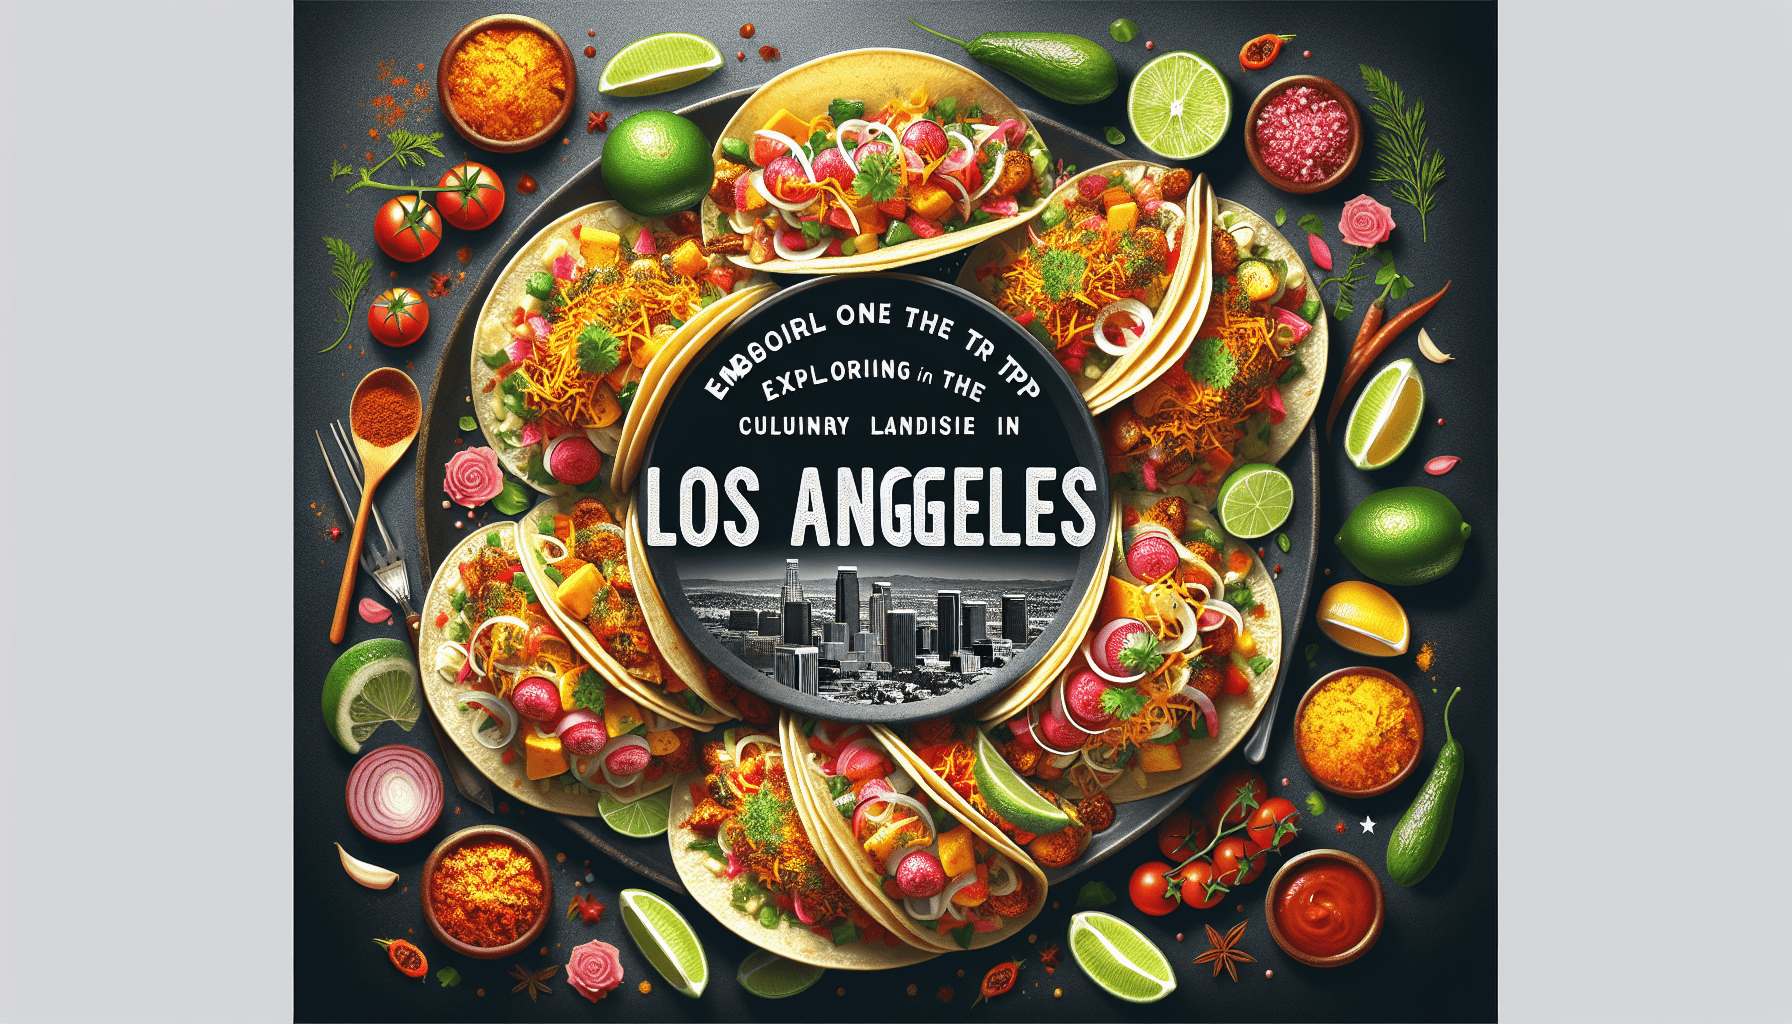 What Food Is Los Angeles Famous For?